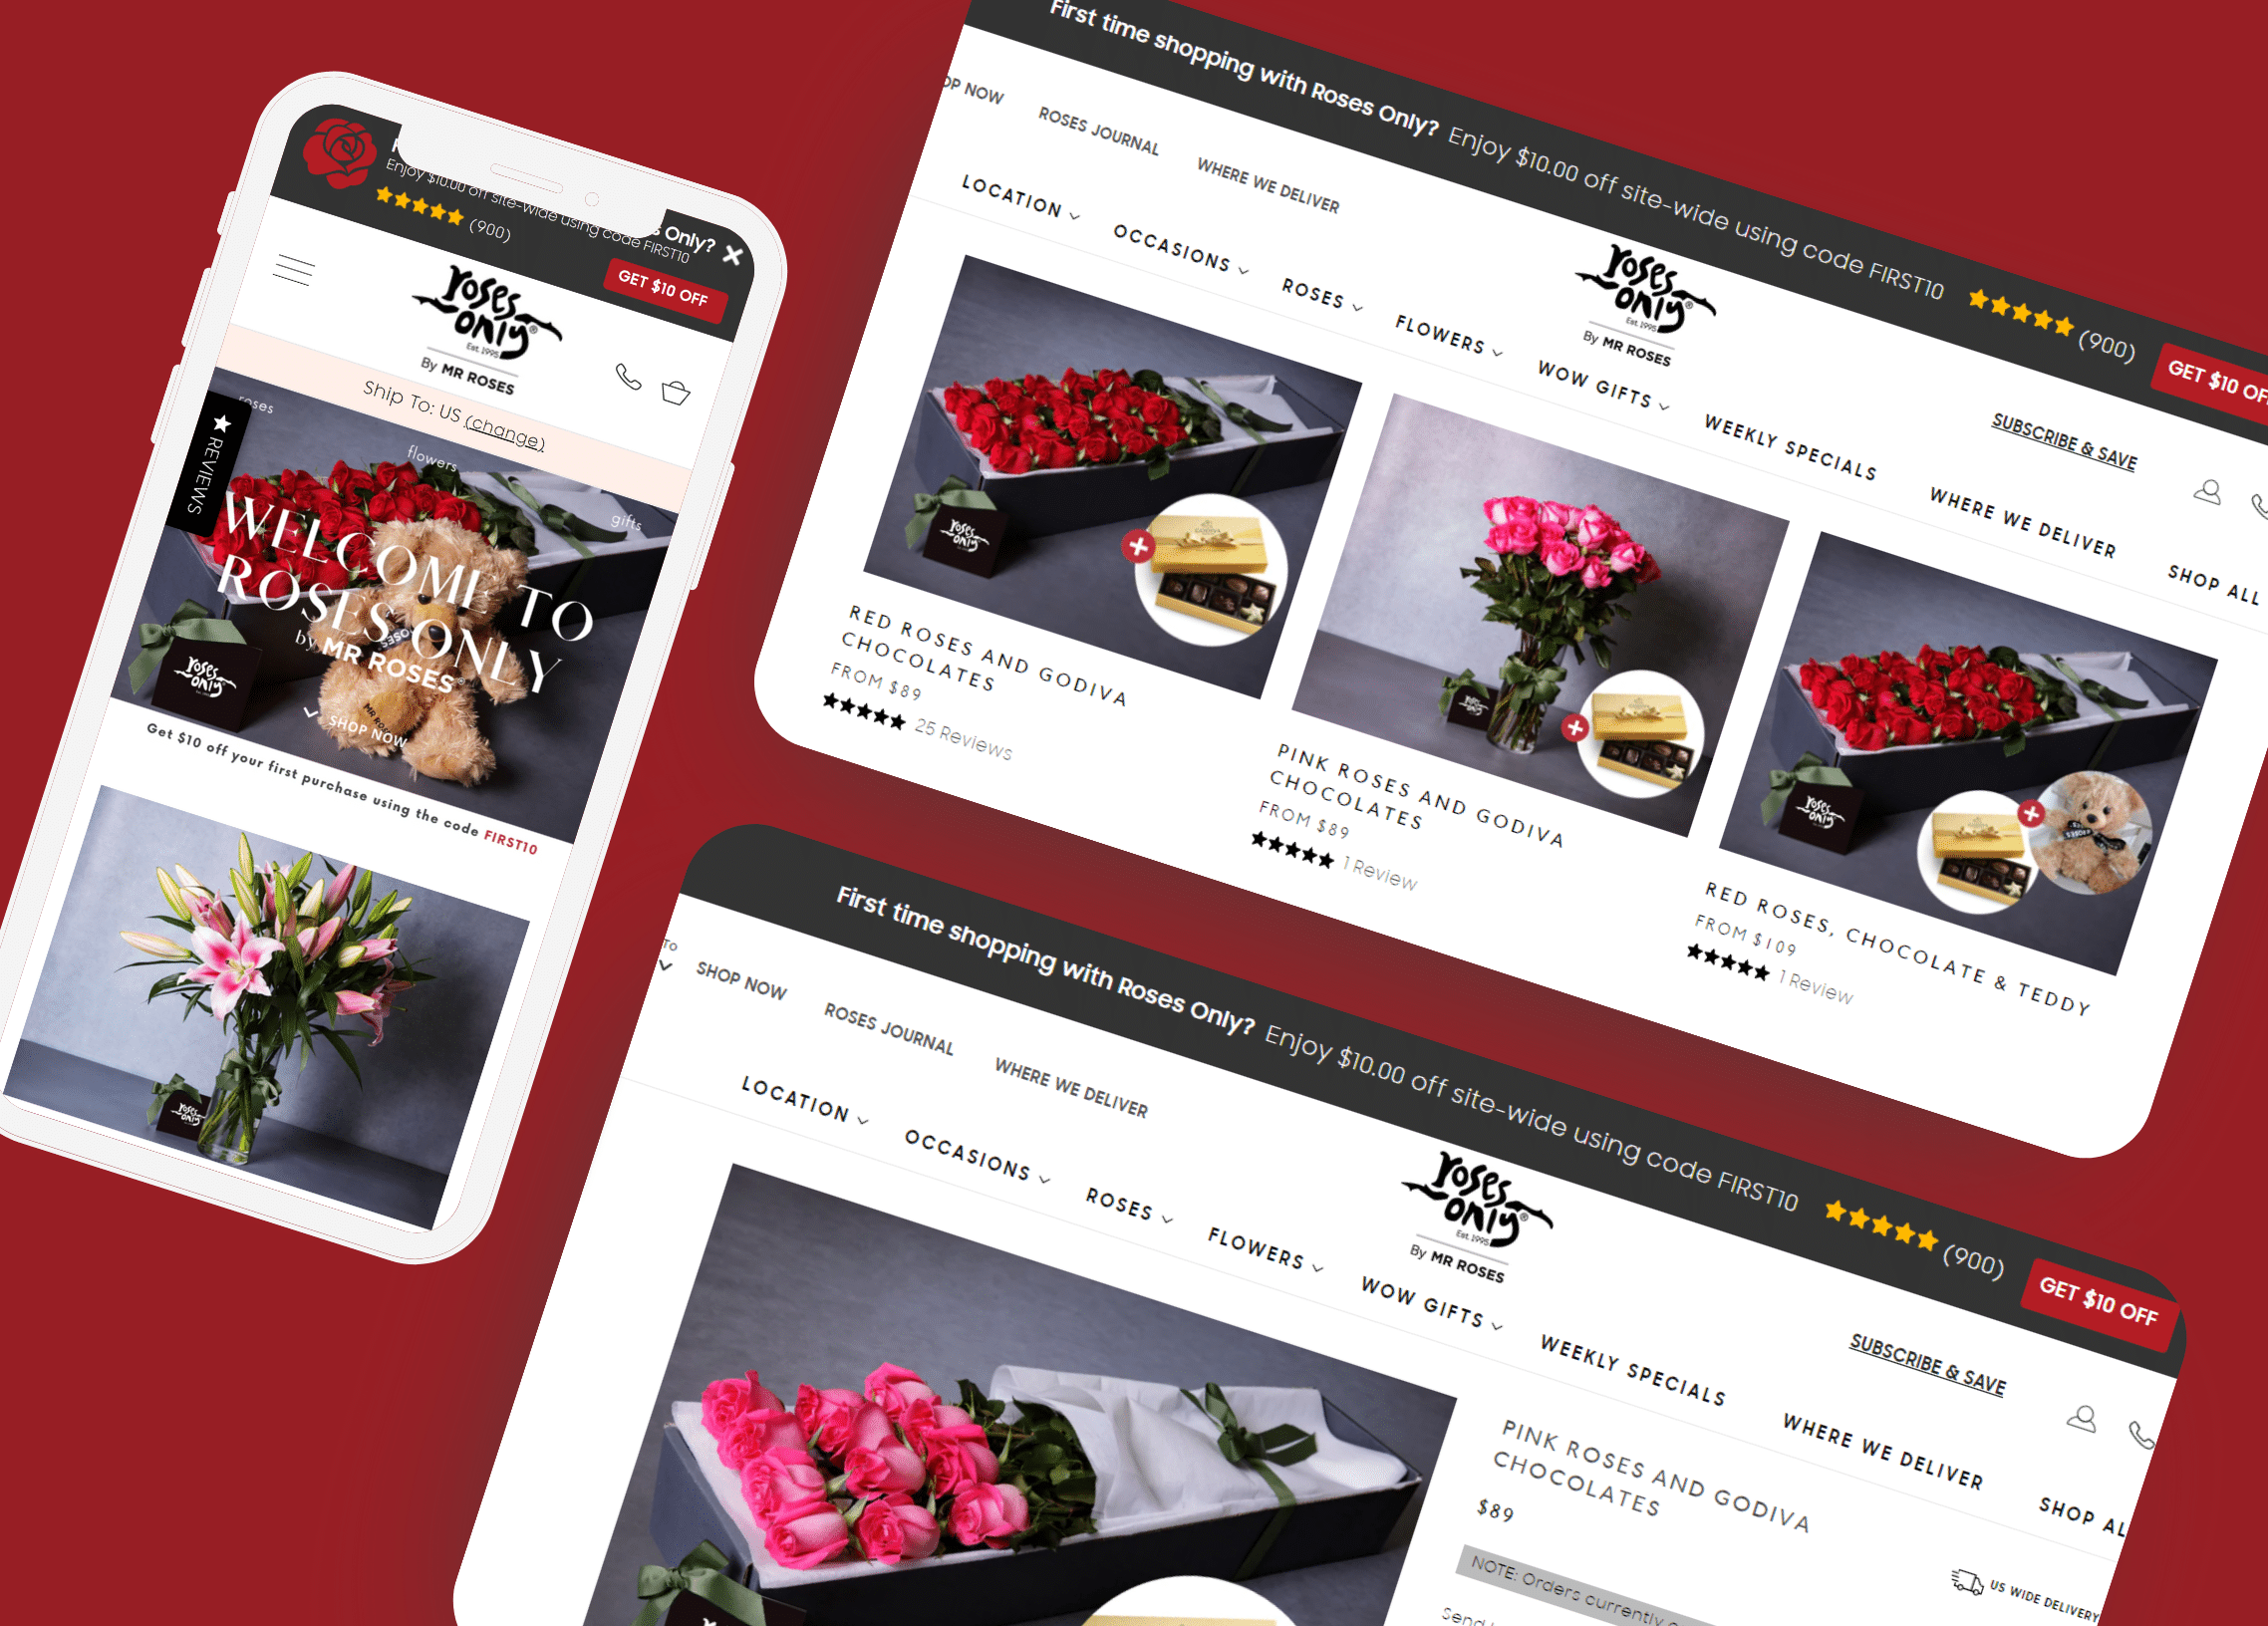 Roses Only - Revitalizing User Experience Through Website Redesign